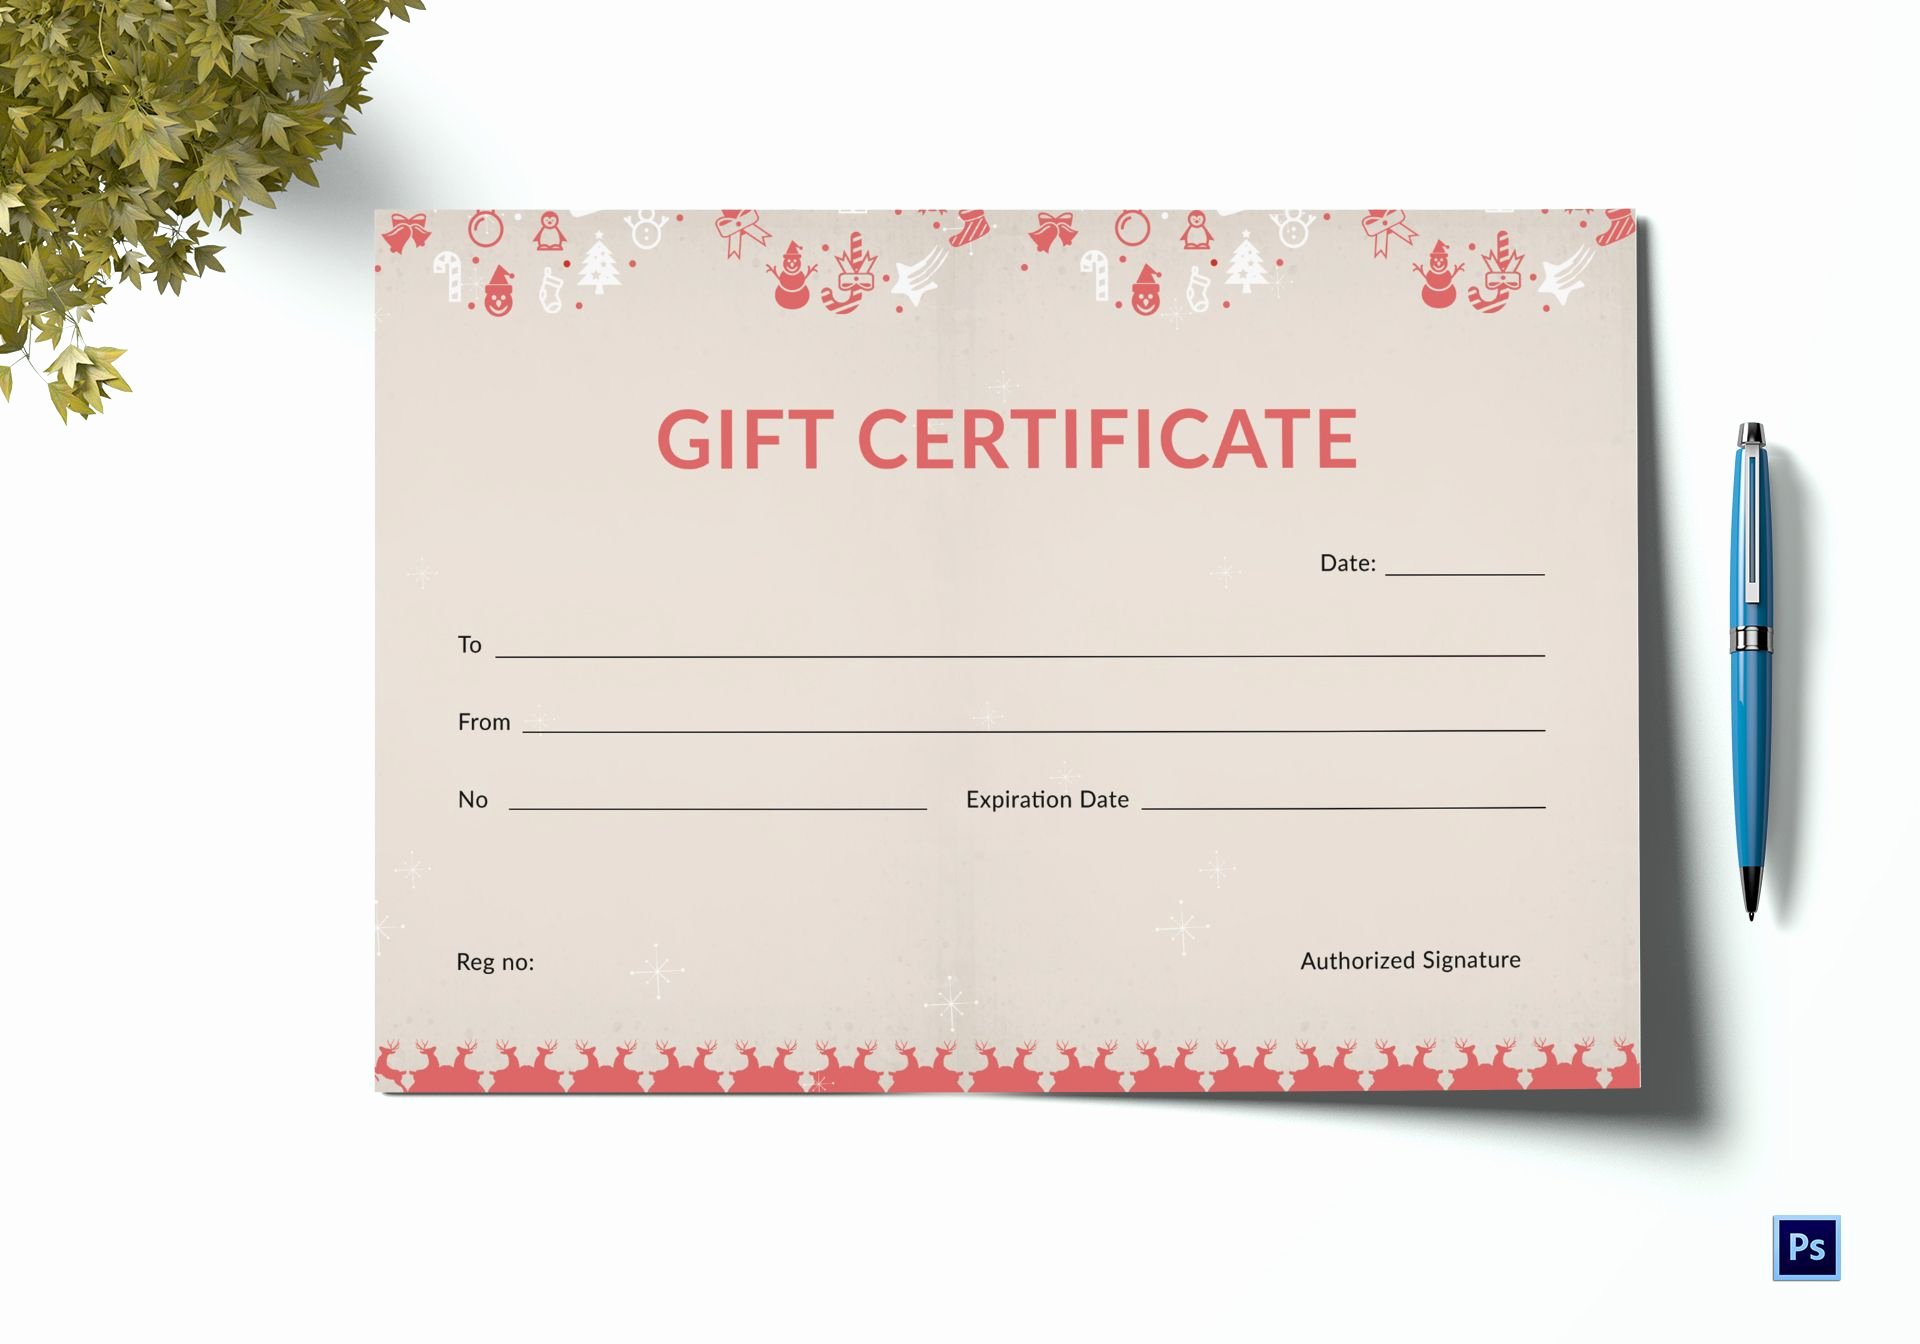 Photoshop Gift Certificate Template Lovely Christmas Holiday Gift Certificate Template In Adobe Shop